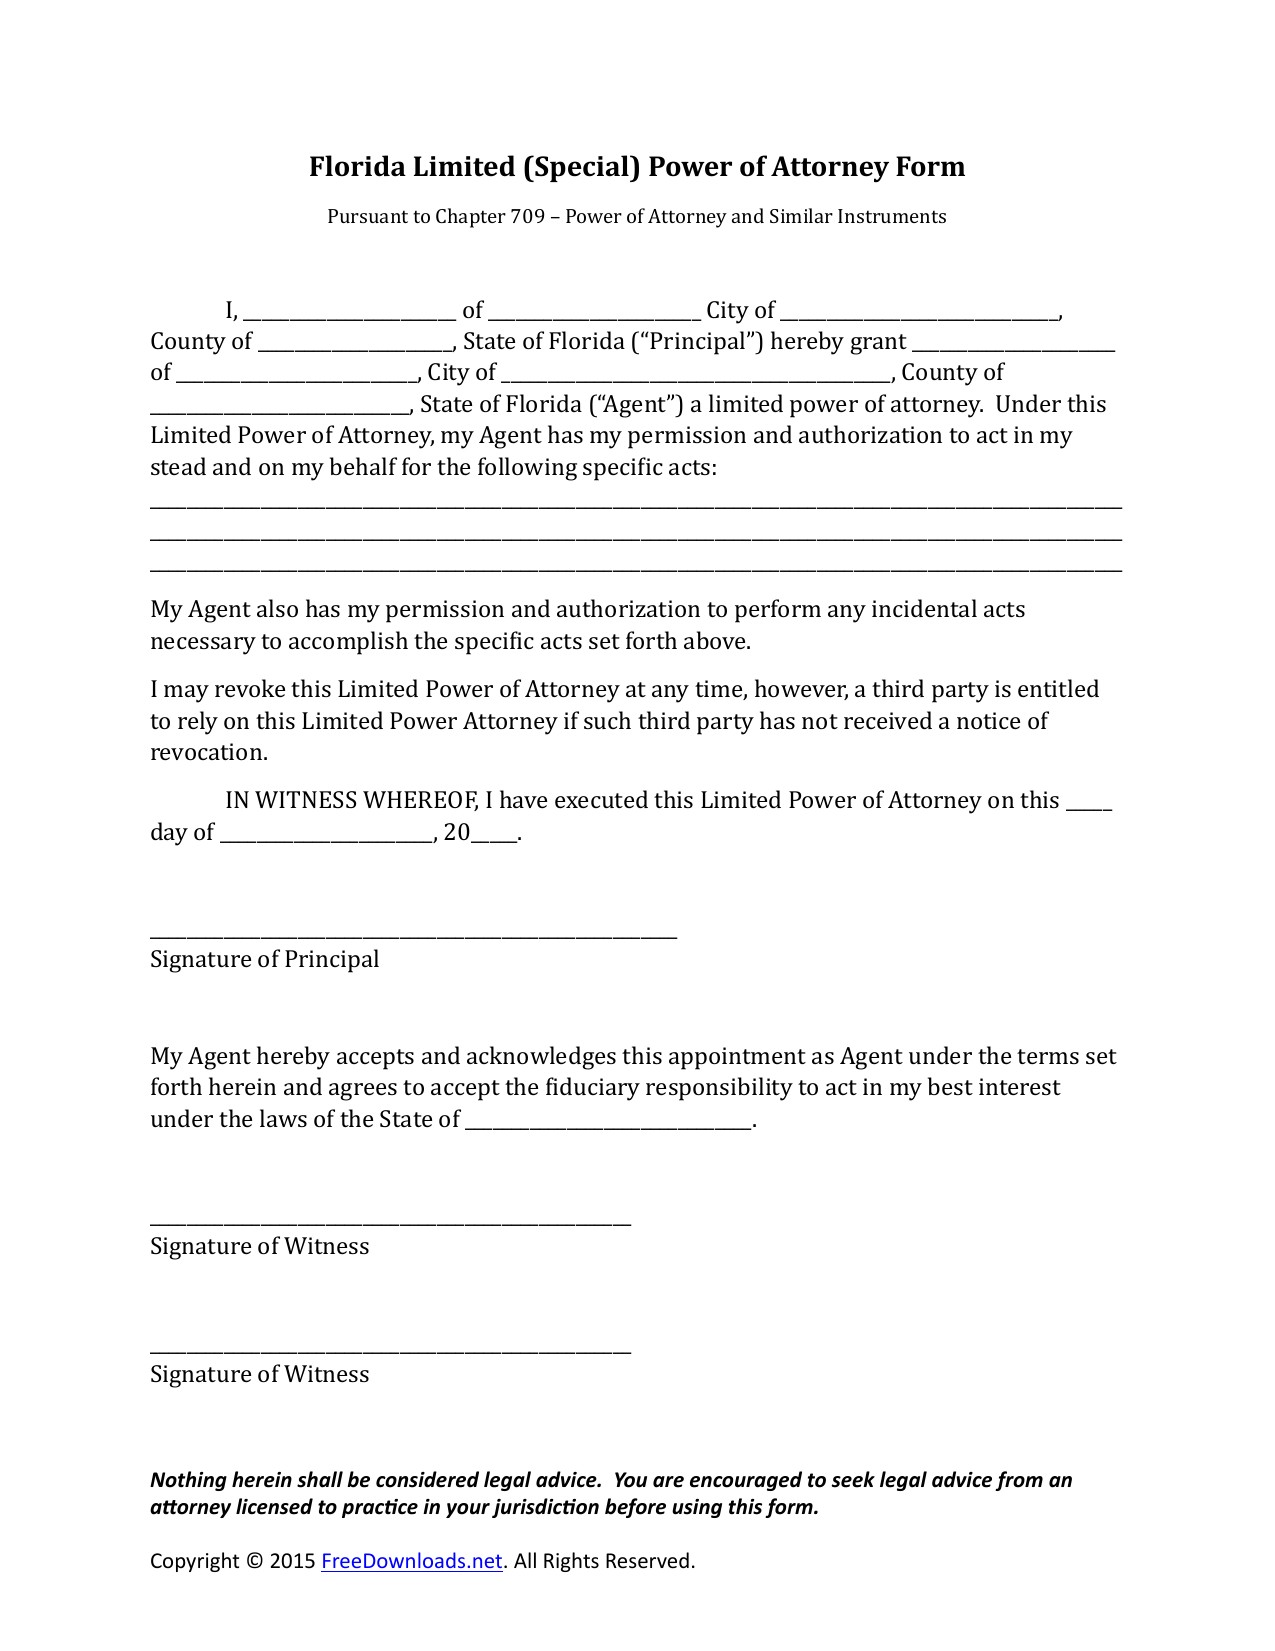 Florida Limited Special Power Of Attorney Form Pdf Impressive Document